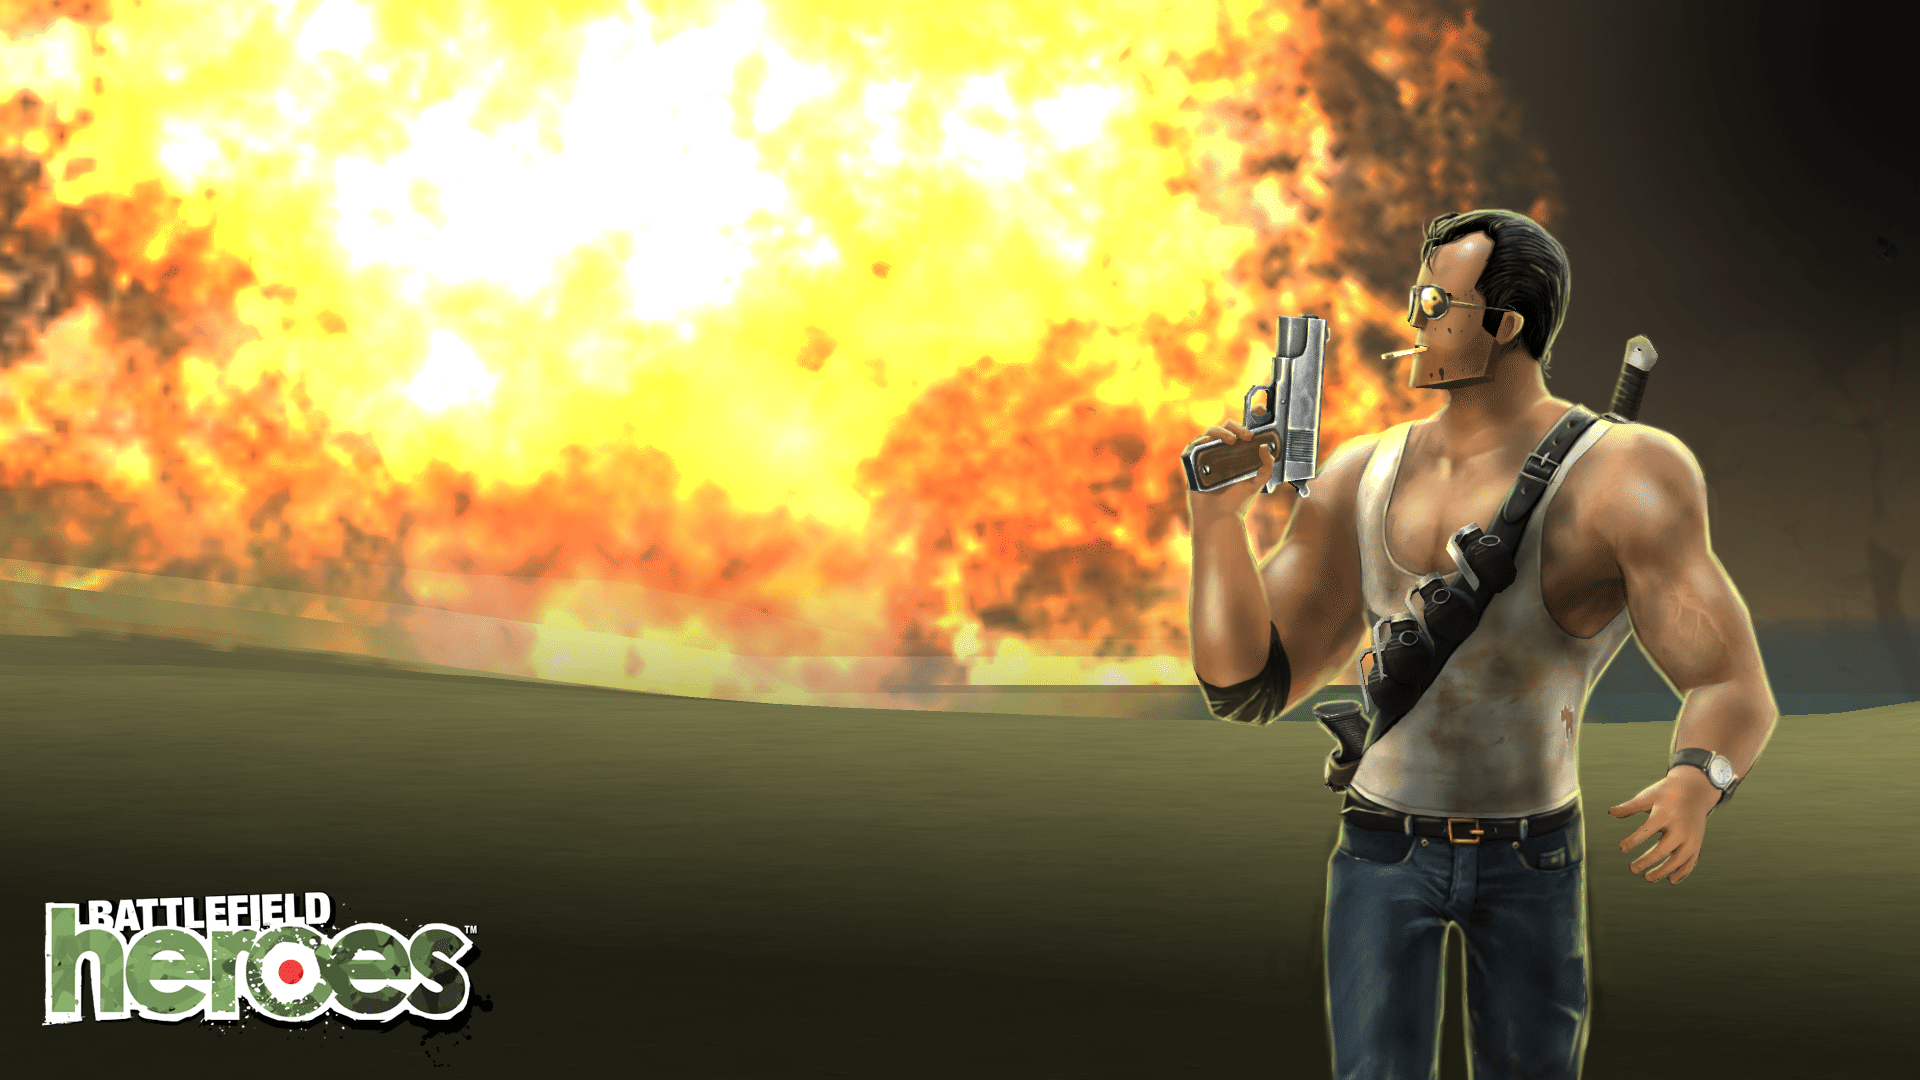 BWB6565: Shooter Background In High Quality, B.SCB WP&BG Collection